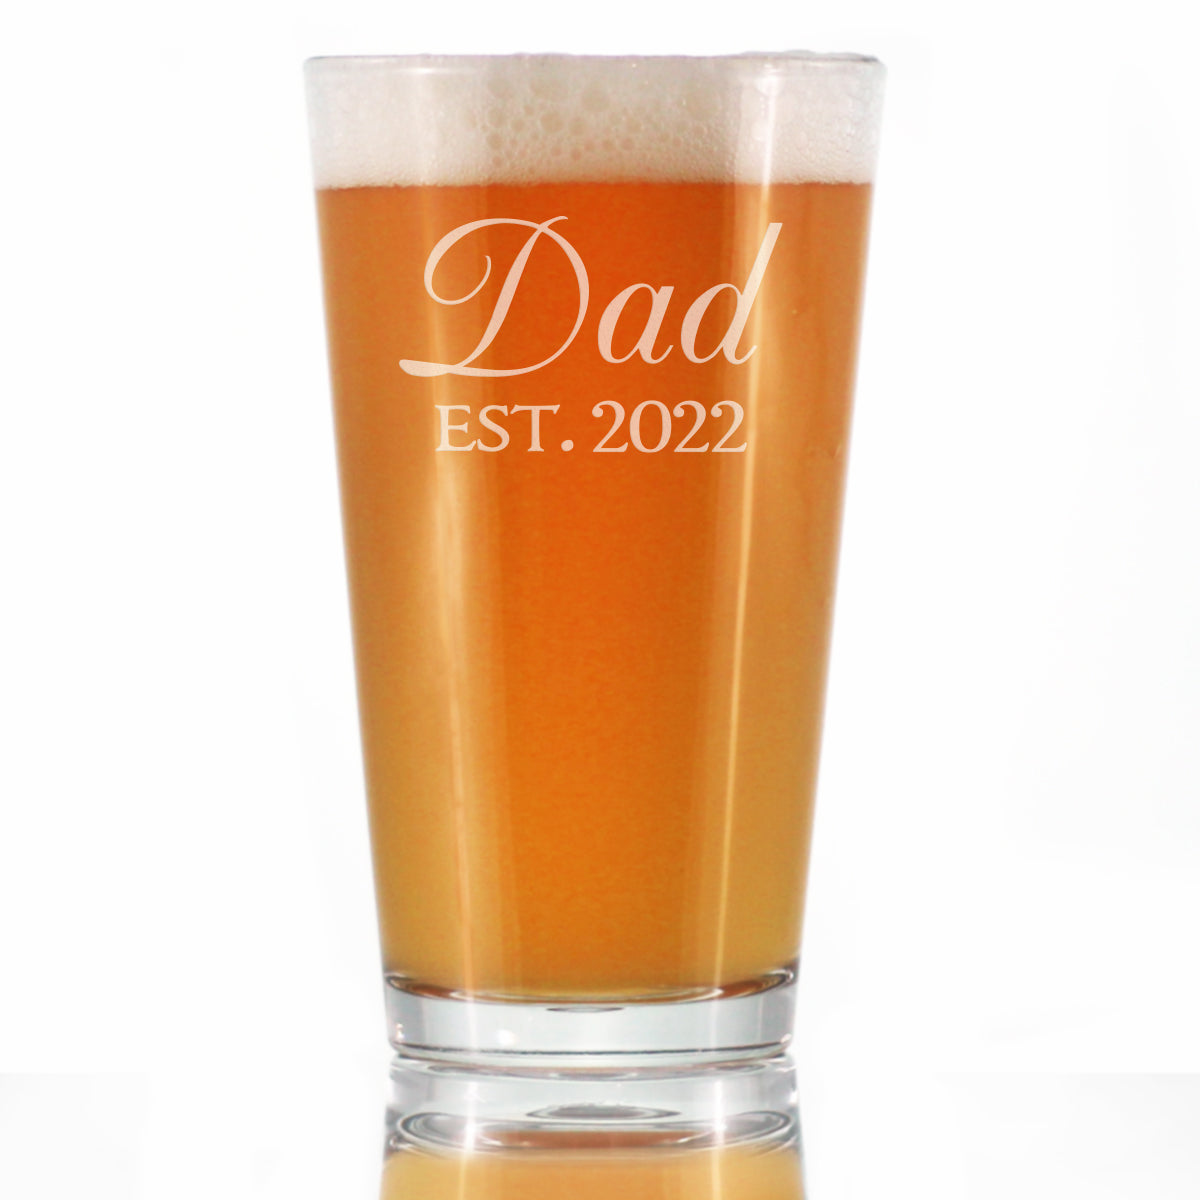 Dad Est 2022 - New Father Pint Glass Gift for First Time Parents - Decorative 16 Oz Glasses